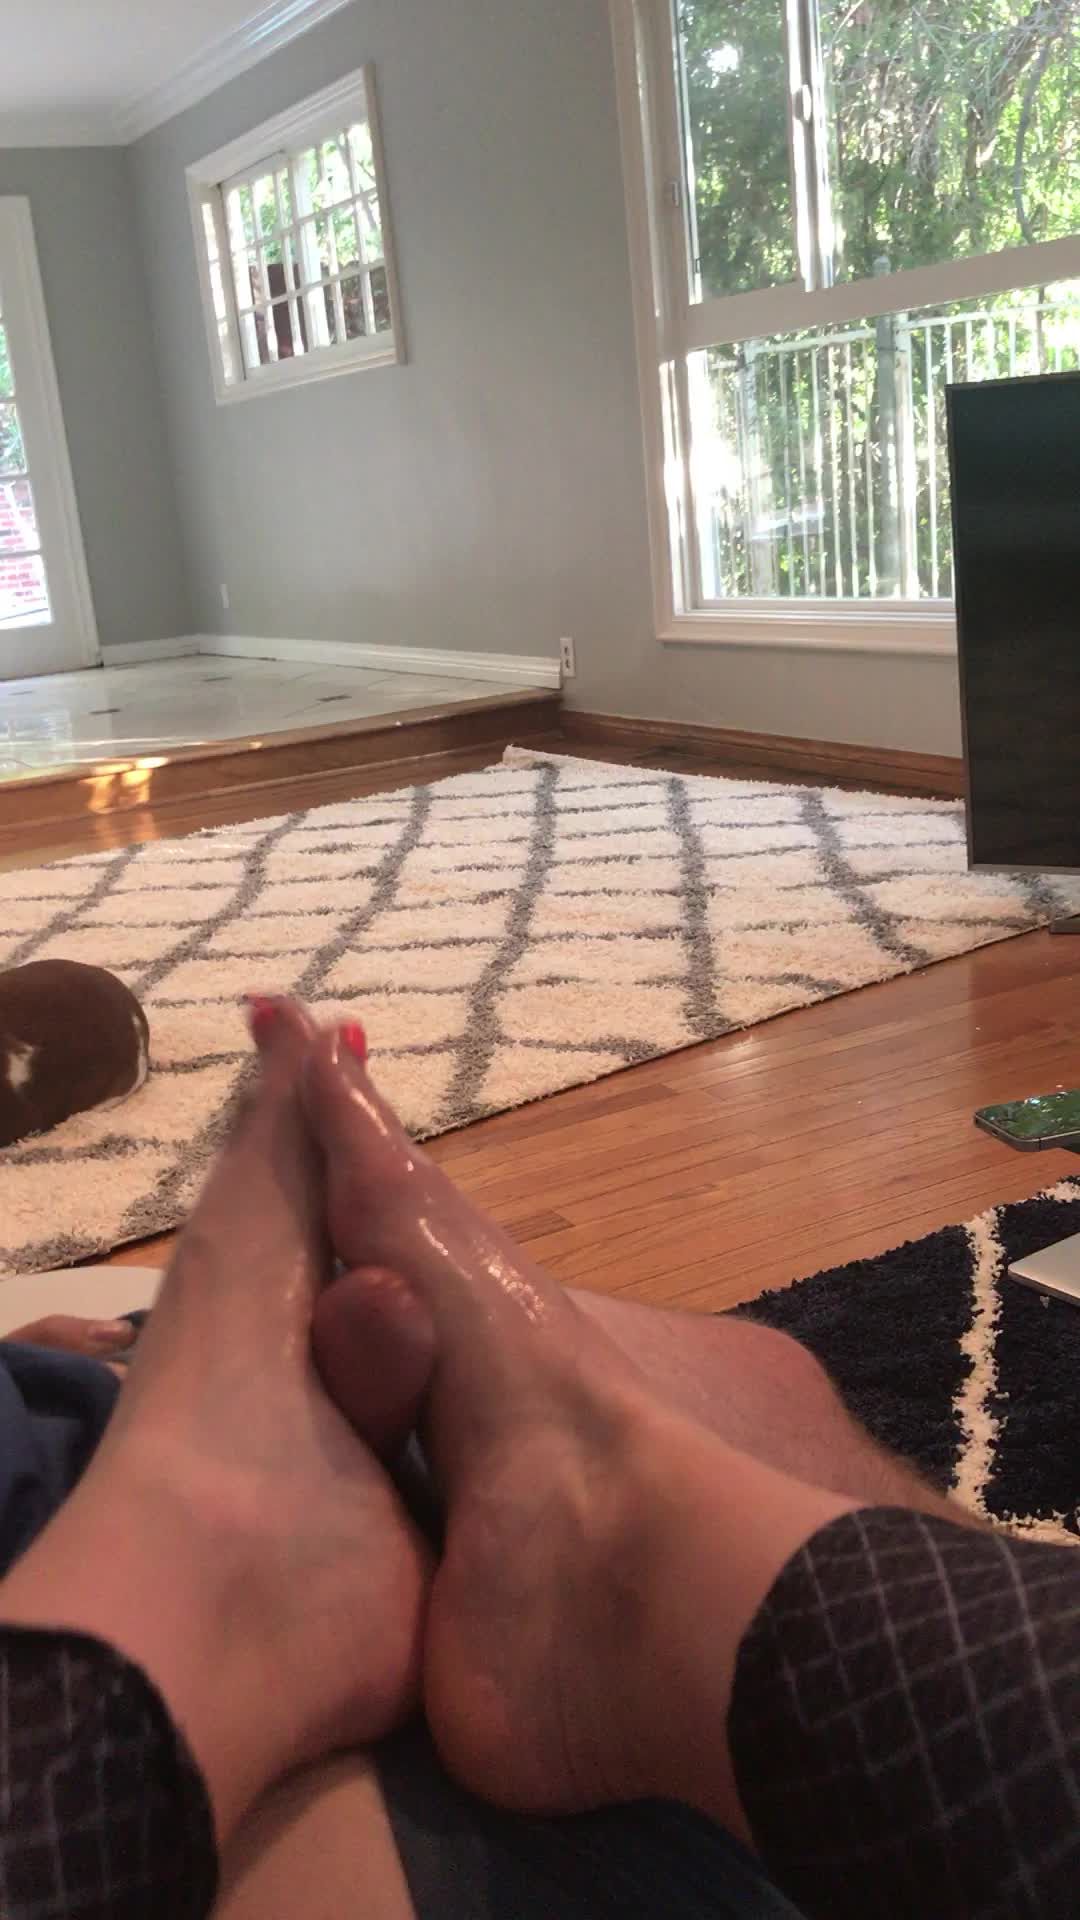 Footjob on Couch